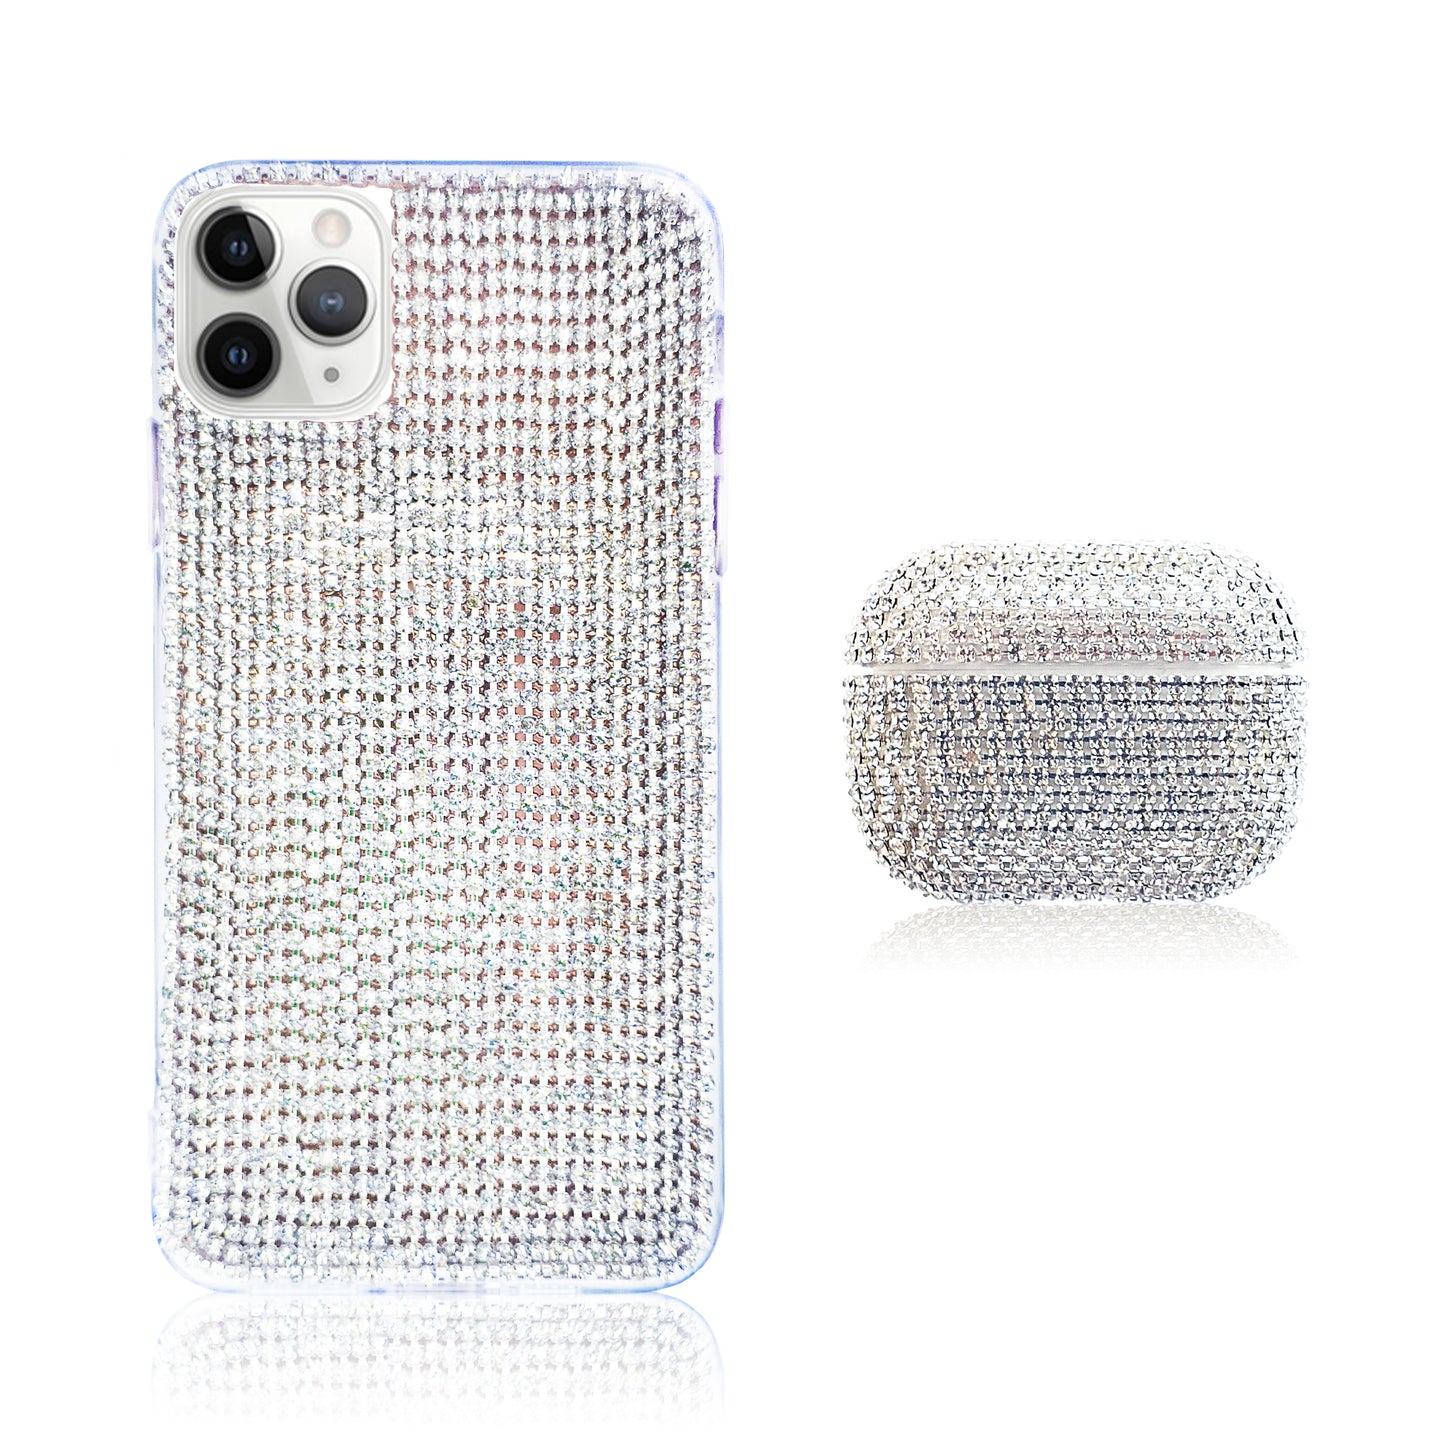 Crystal White Silicon iPhone Case with AirPods Pro